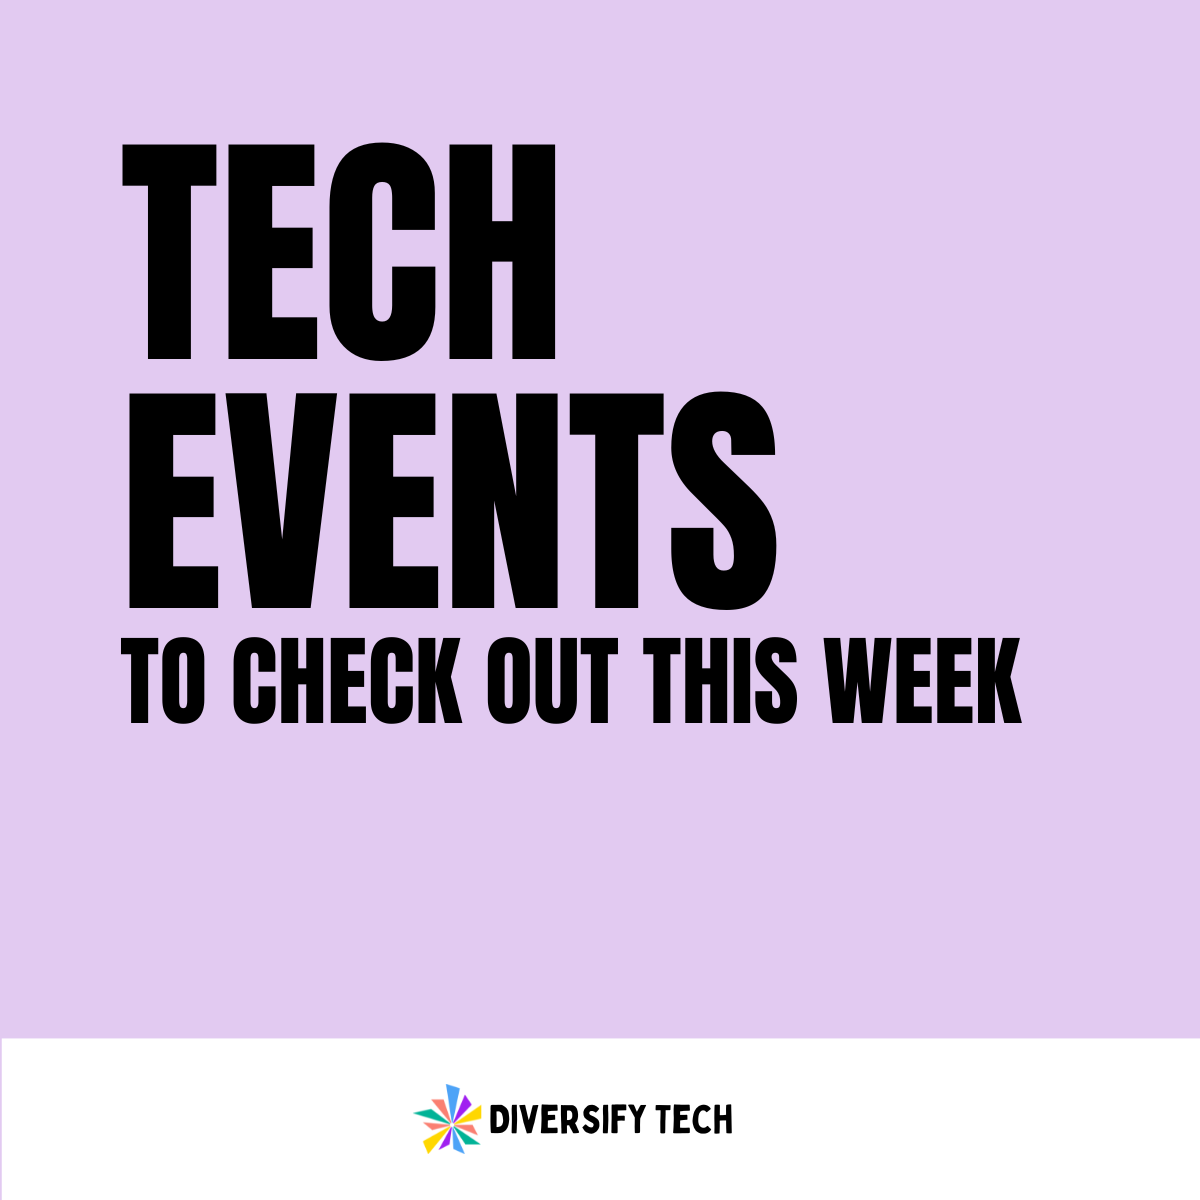 Hello! Here are some tech events to check out this week including events like

✨ RedwoodJS Conf 2023
📊 Health Data Analytics with KNIME
🤝 BlackTIDES Connect & Networking Strategies 

Details are in the thread below 👇🏾

#DiversifyTech #BlackTechTwitter #WomenInTech